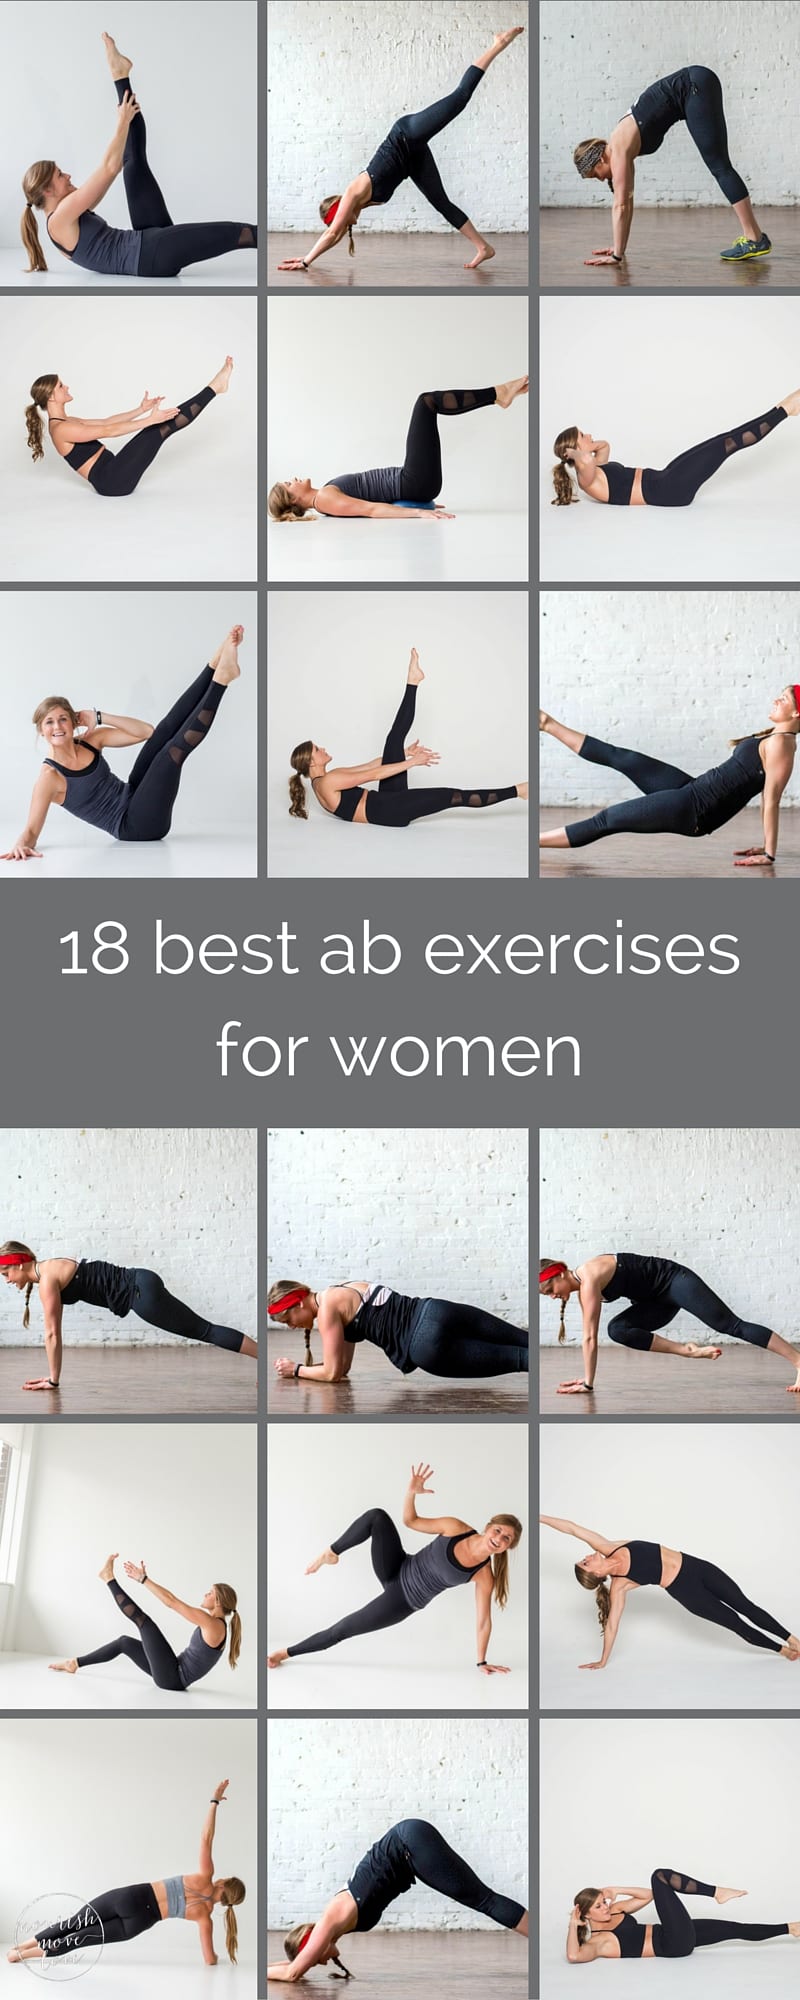 Trainers Reveal: The Best Abs Exercise of All Time Shape